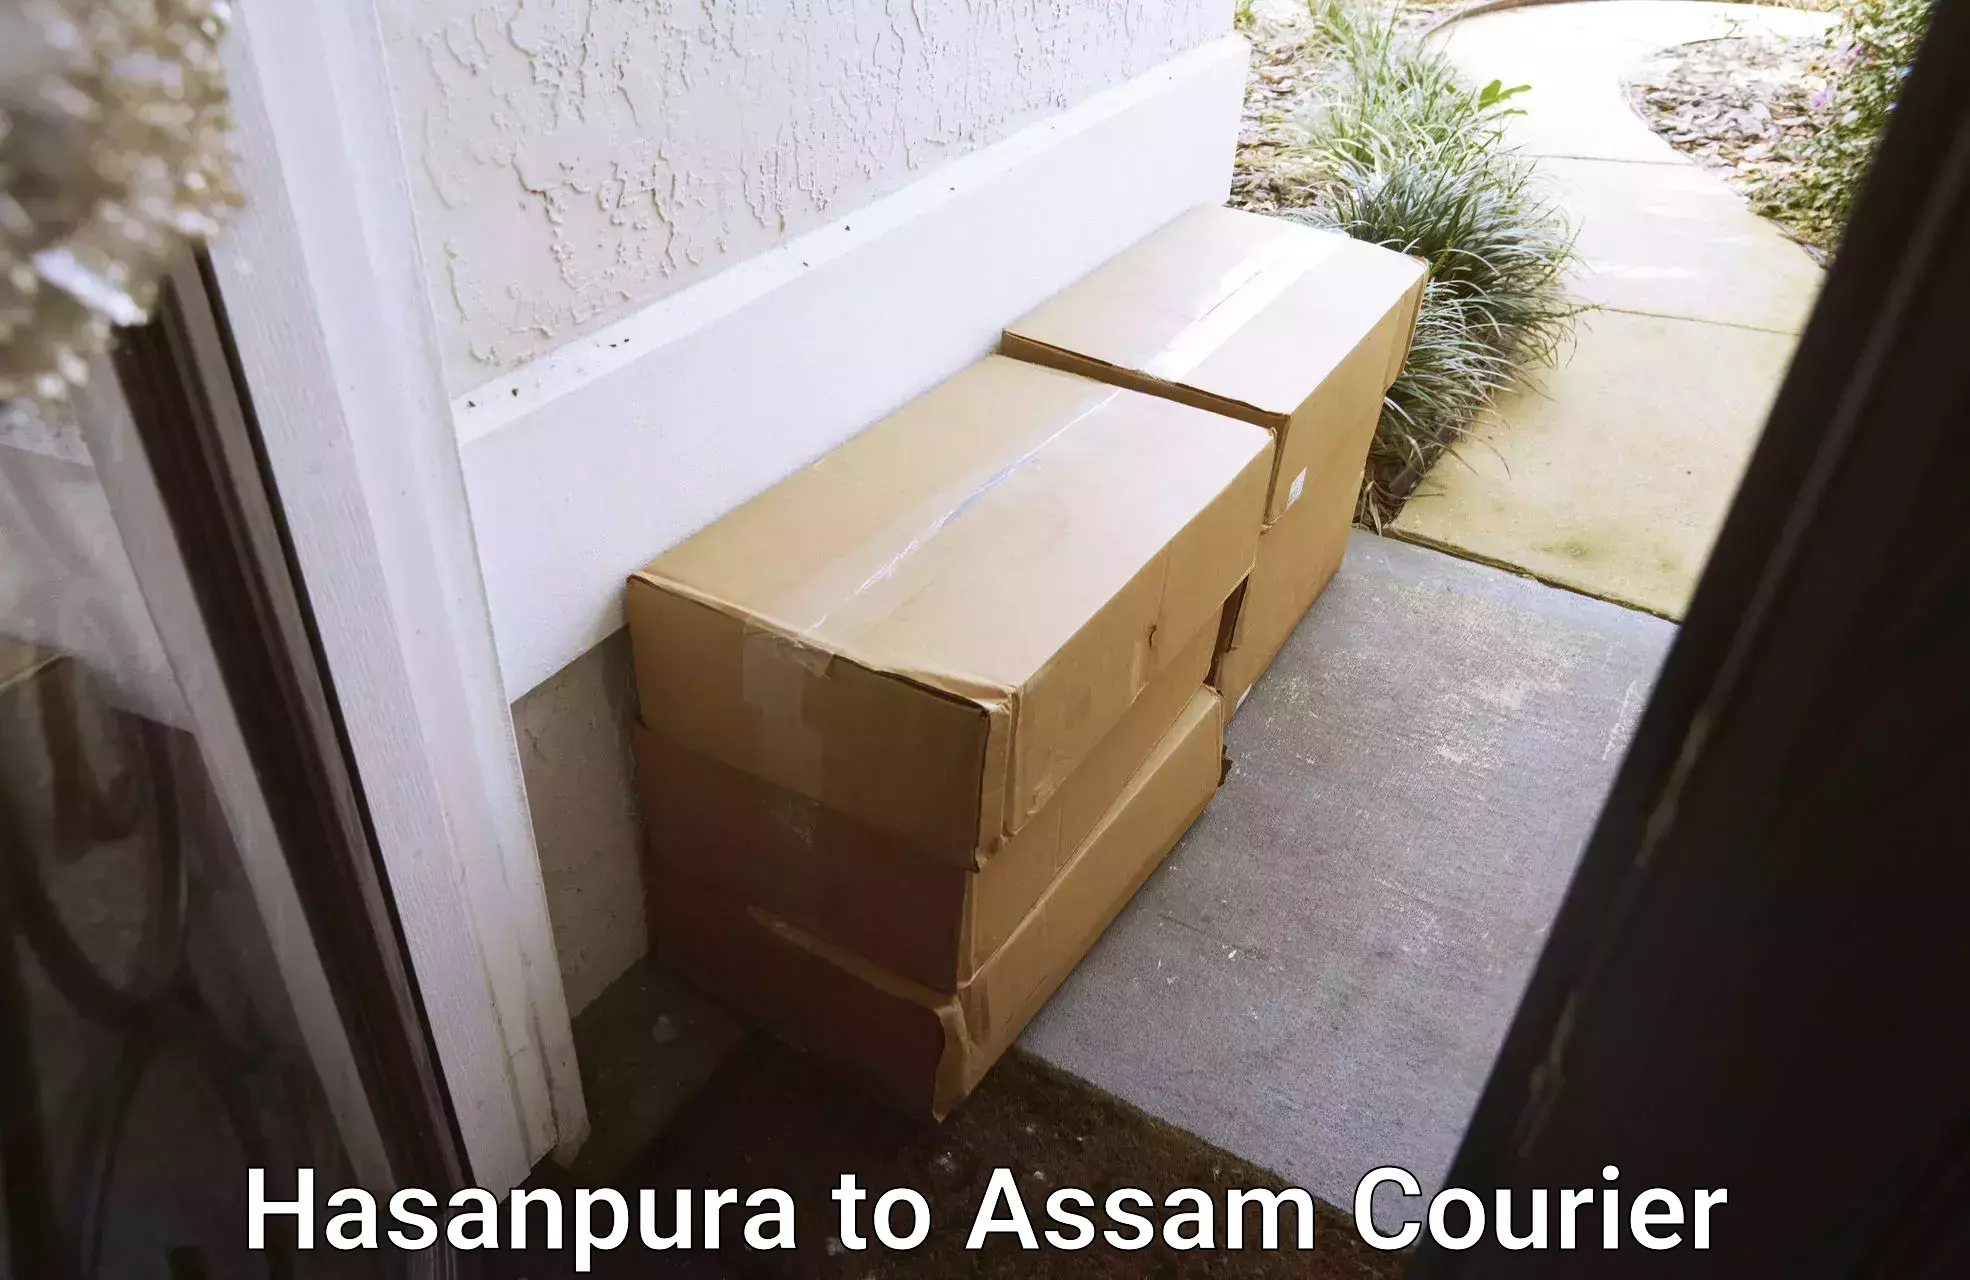 Budget-friendly movers Hasanpura to Assam